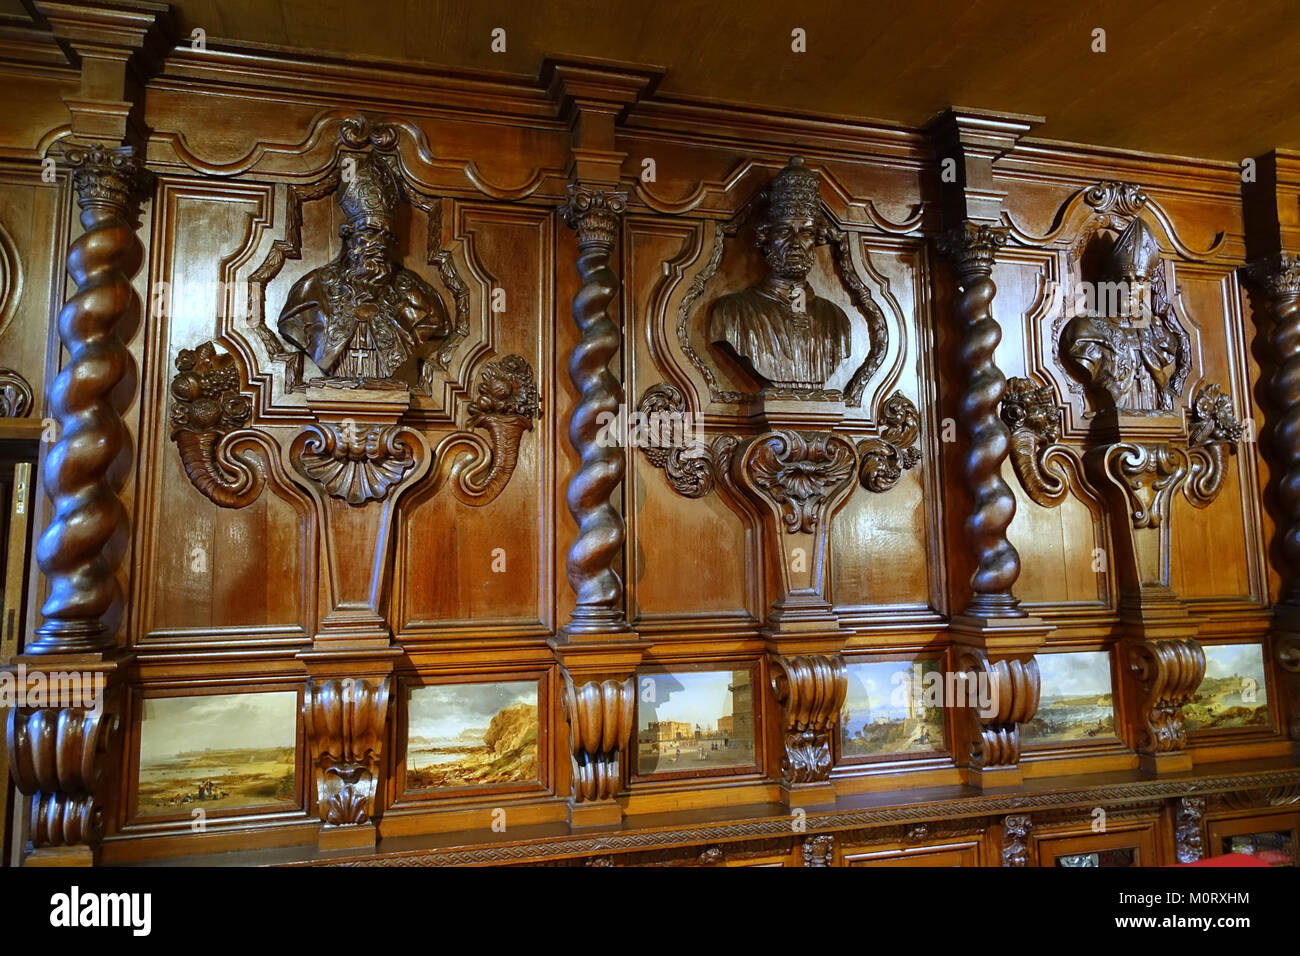 Carved busts and panelling from a German monastery, acquired 1837, with paintings by John Wilsom Carmichael - Oak Room, Chatsworth House - Derbyshire, England - DSC03044 Stock Photo